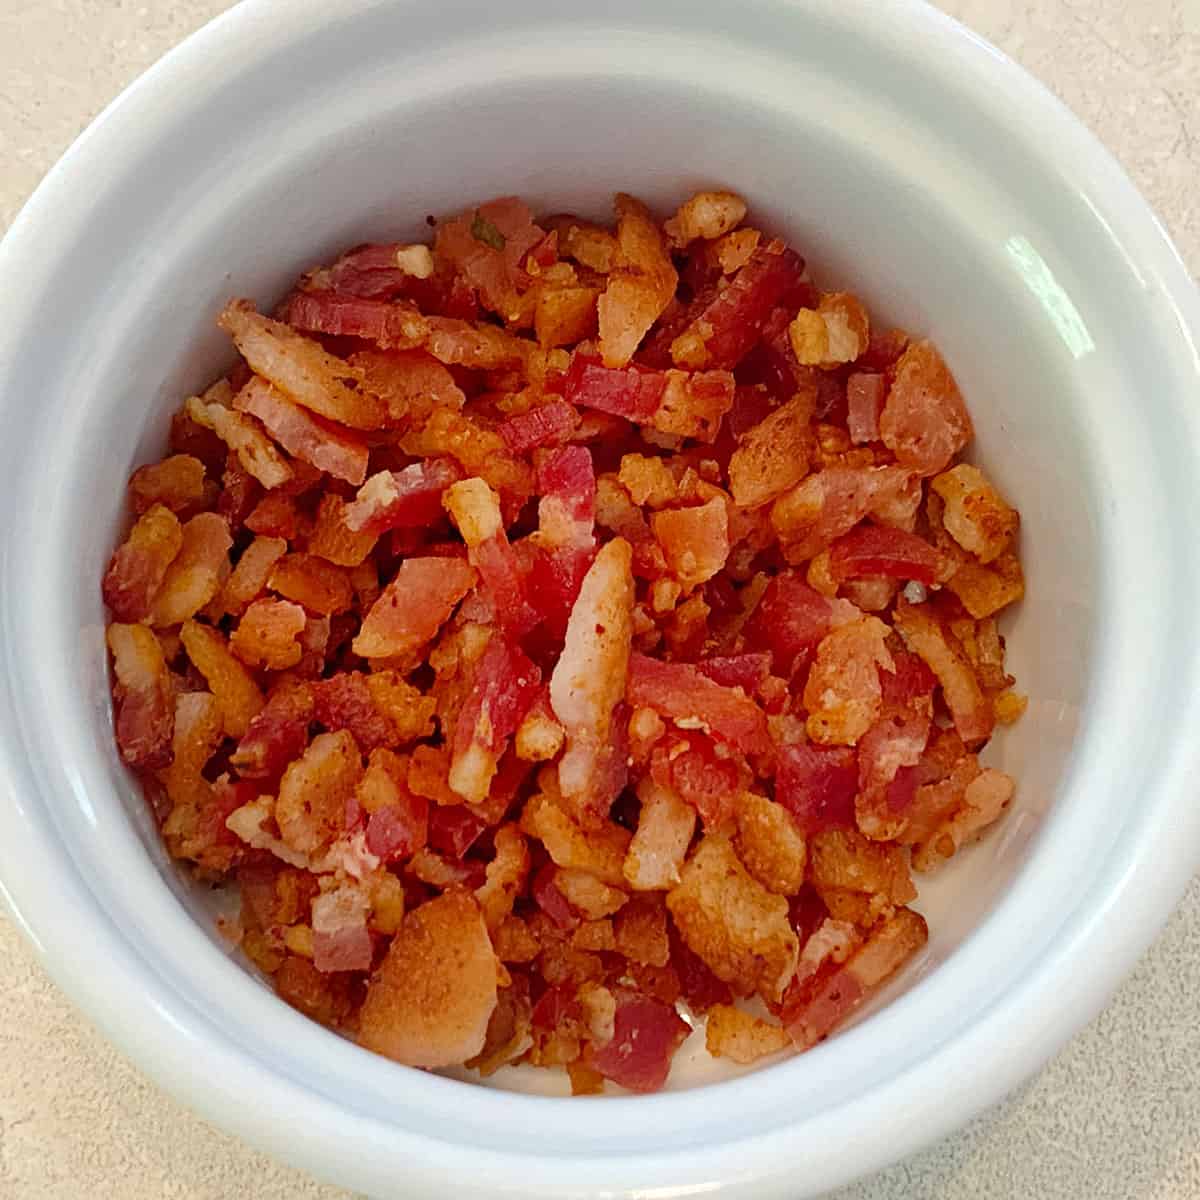 Cooked, diced bacon in a dish